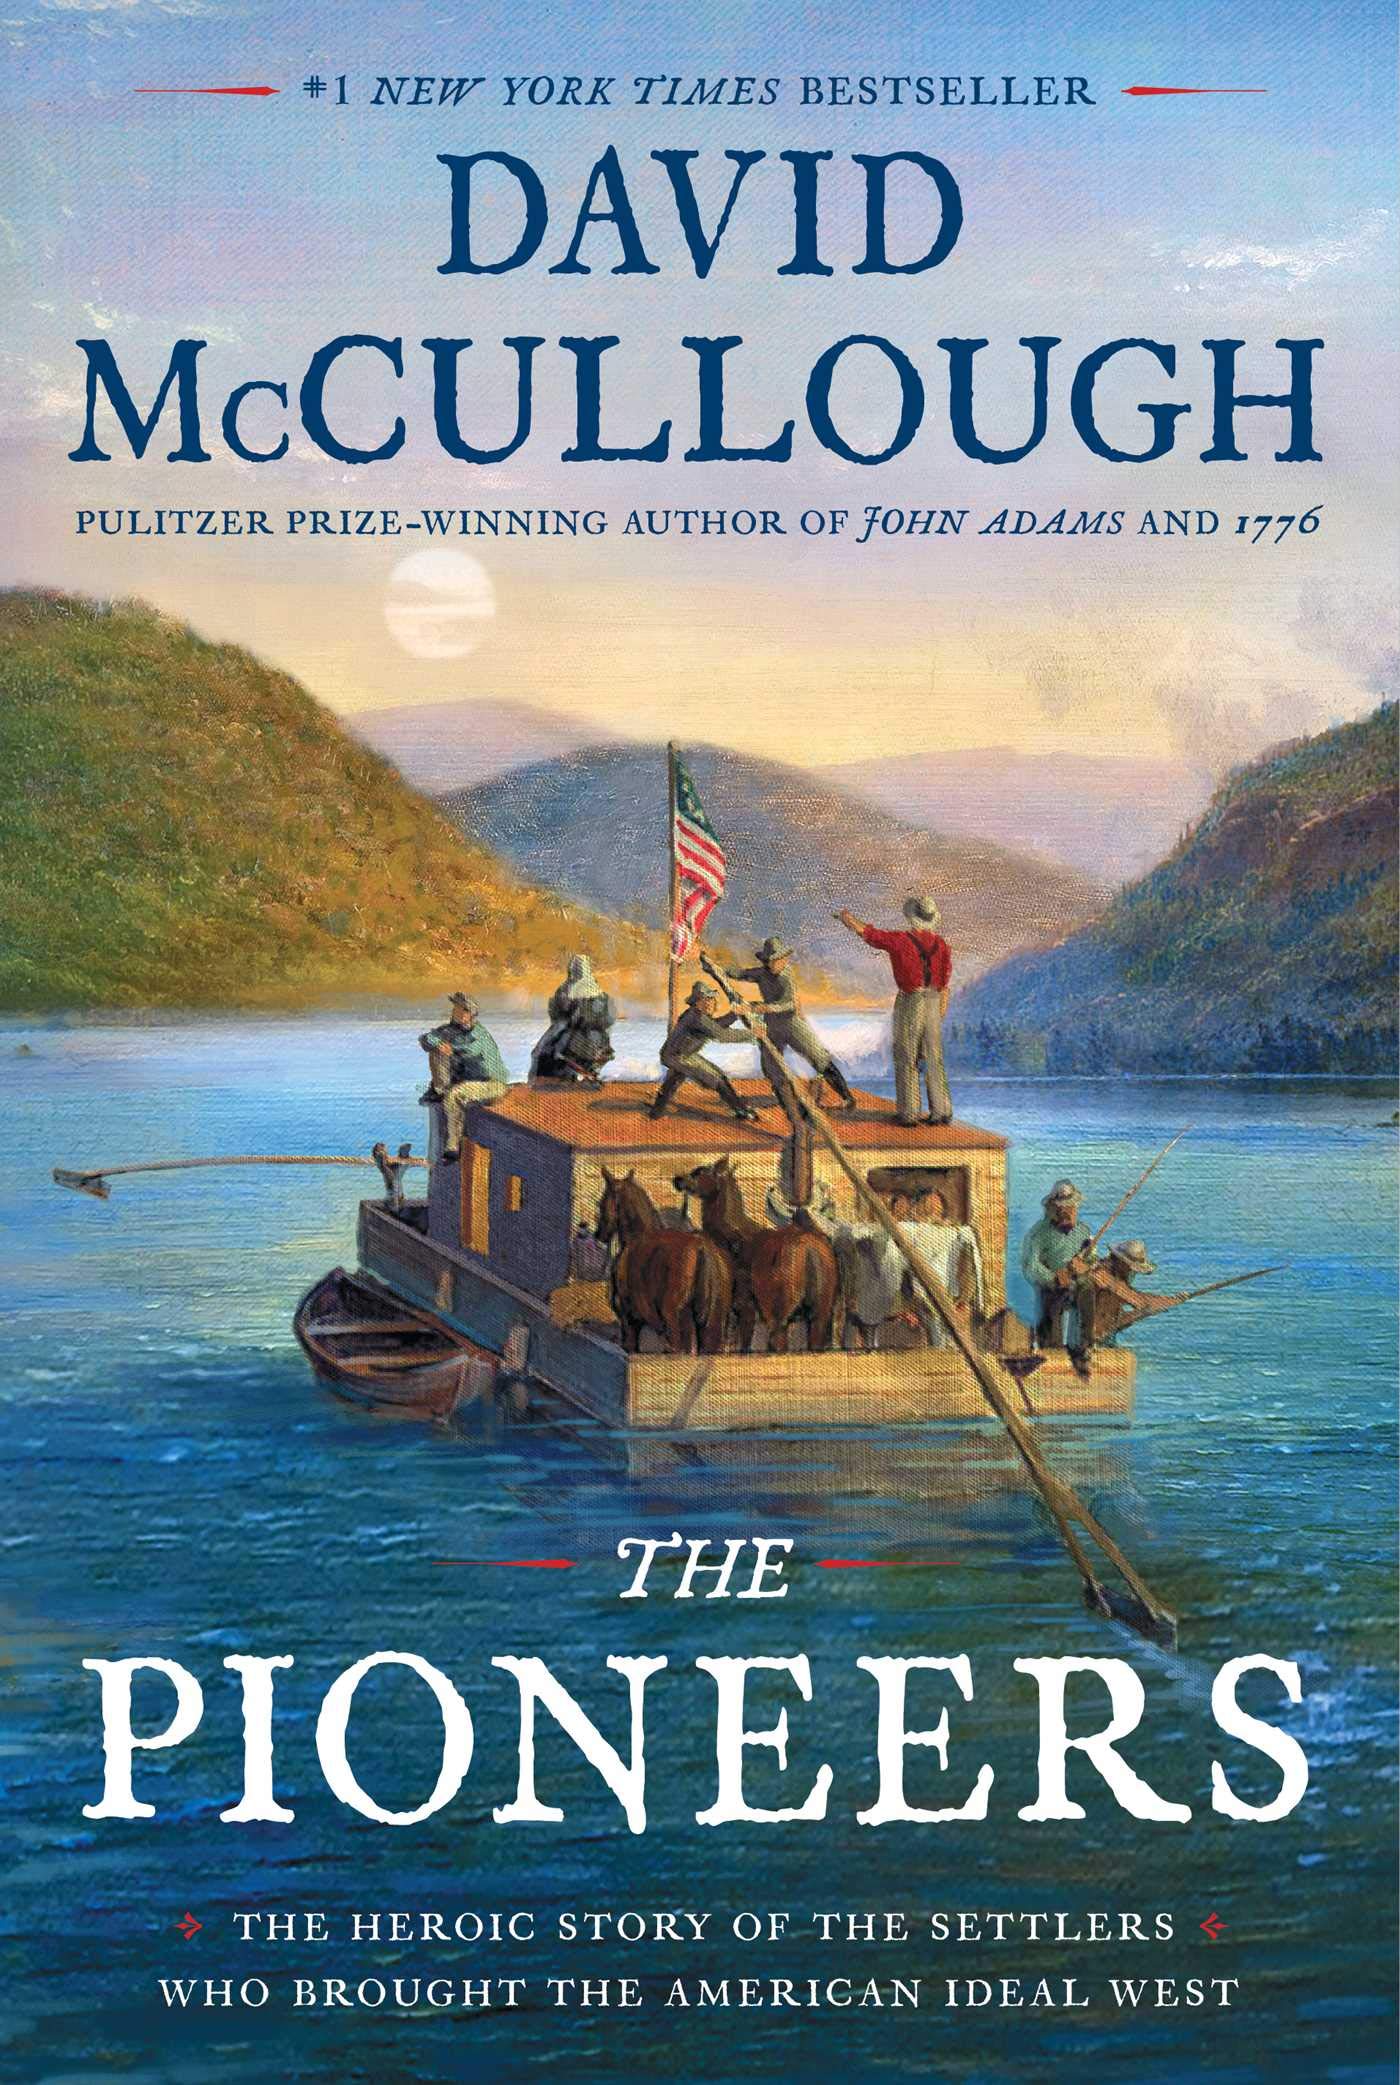 A book cover featuring a vintage illustration of early american settlers traveling by a flatboat on a river, with a forested landscape in the backdrop, representing the westward expansion and pioneering spirit of america. the cover includes the title "the pioneers" and the author's name, david mccullough, with accolades highlighting his status as a bestselling author and pulitzer prize winner.